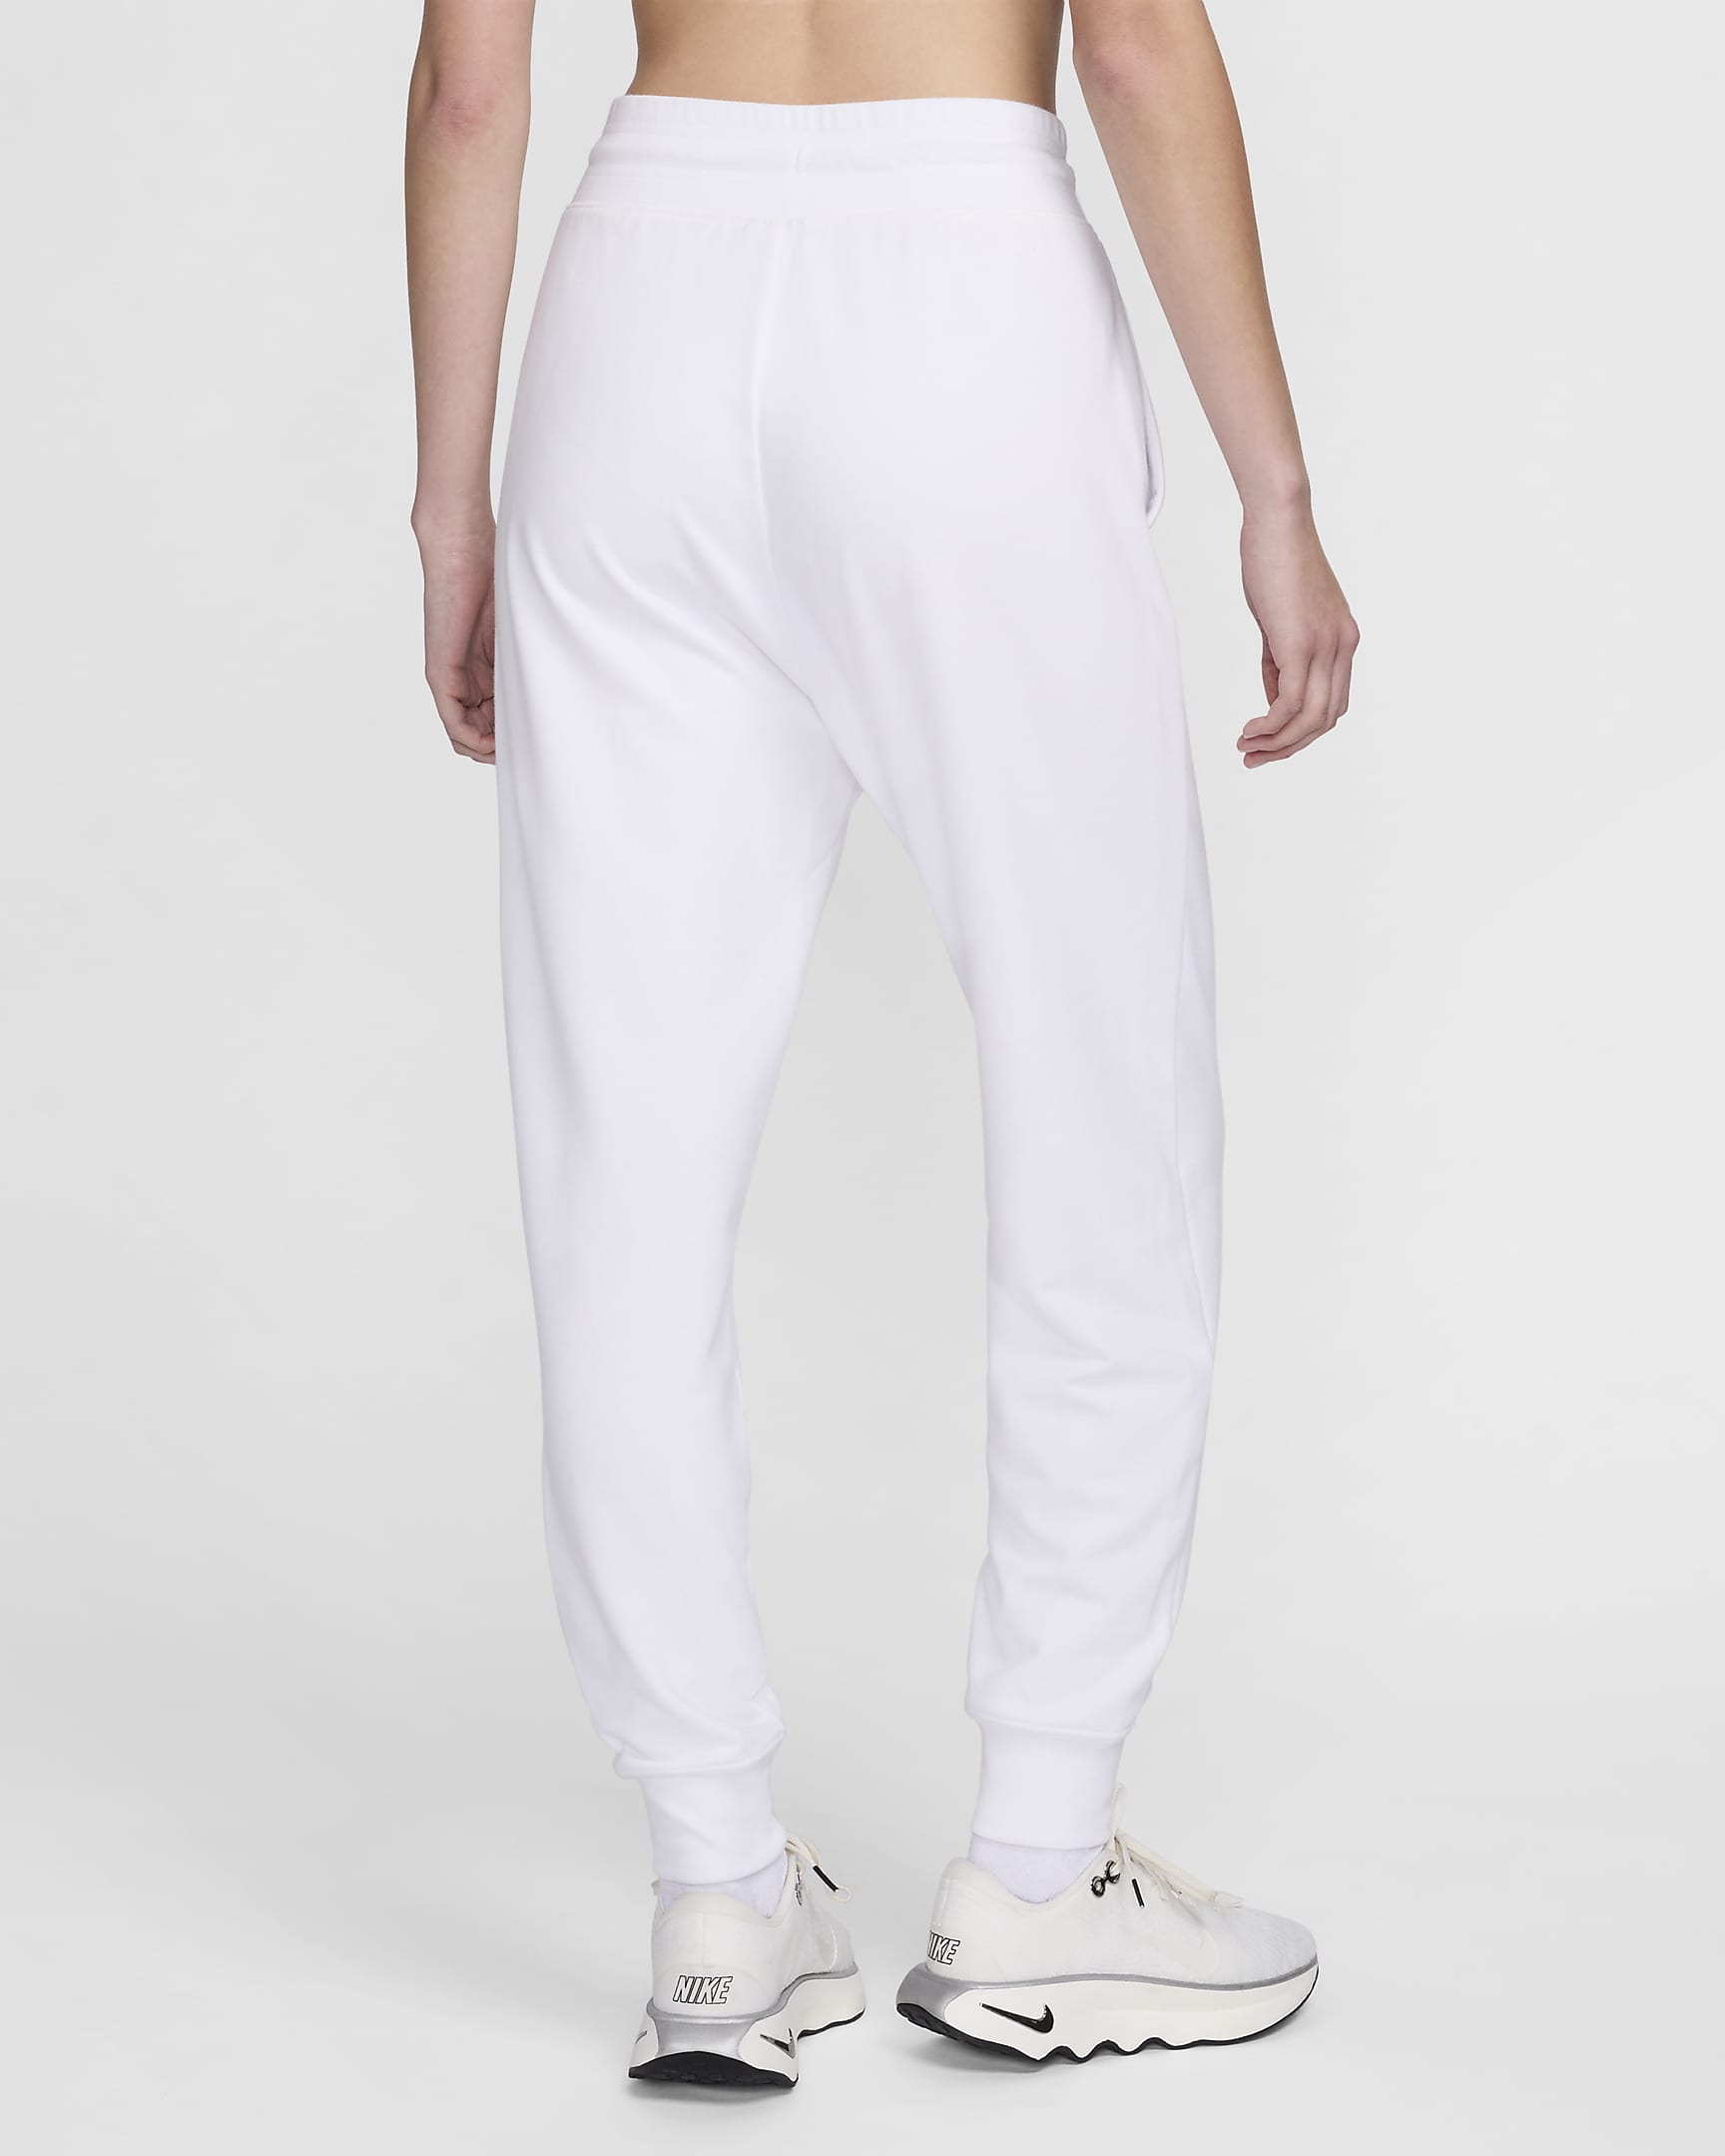 Women's High-Waisted 7/8 French Terry Joggers - FB5434